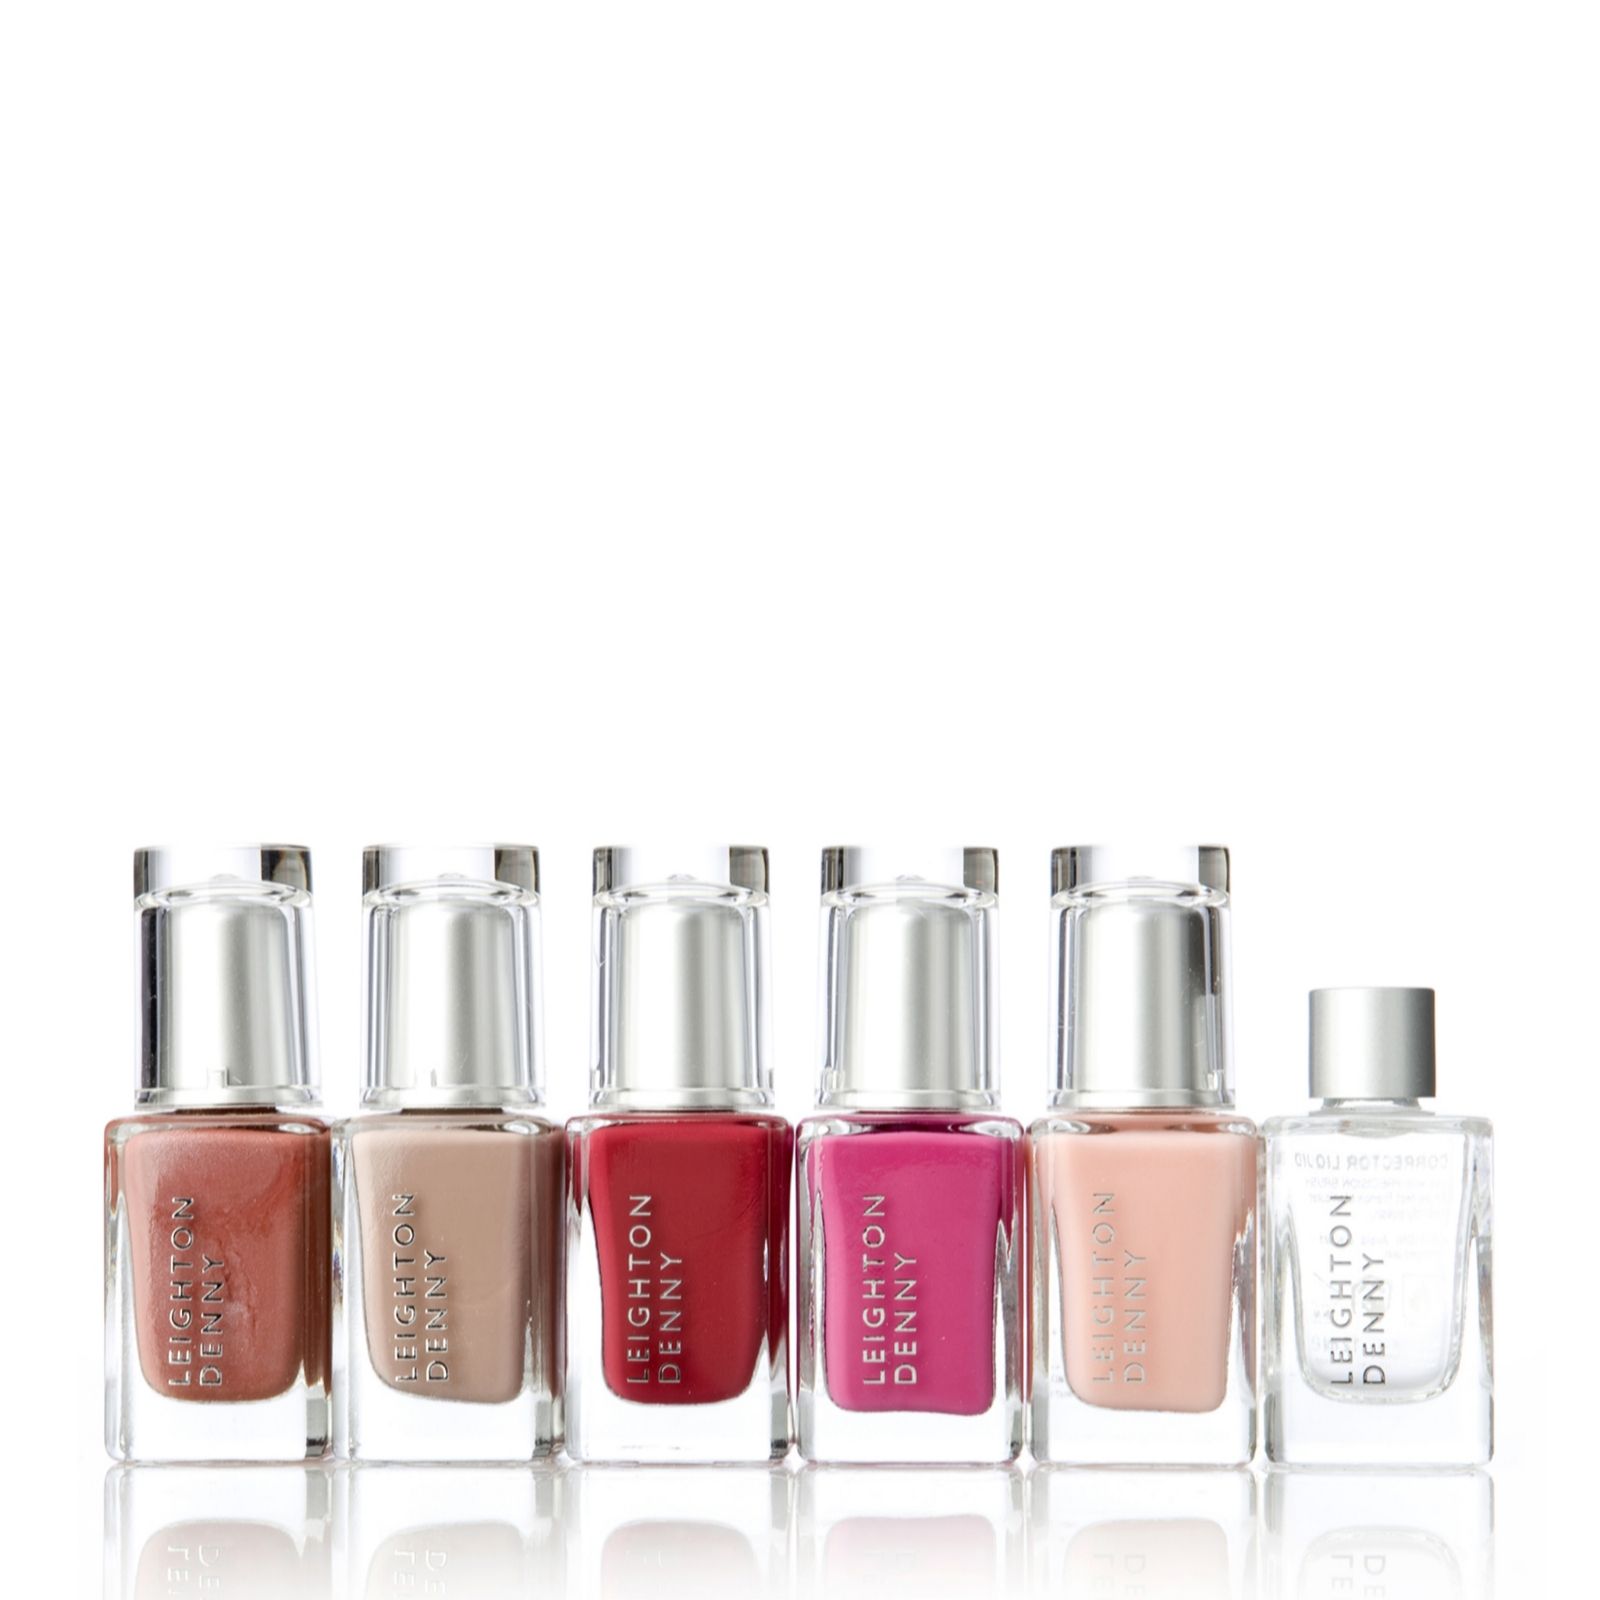 Leighton Denny 6 Piece Here Come the Girls Collection - QVC UK